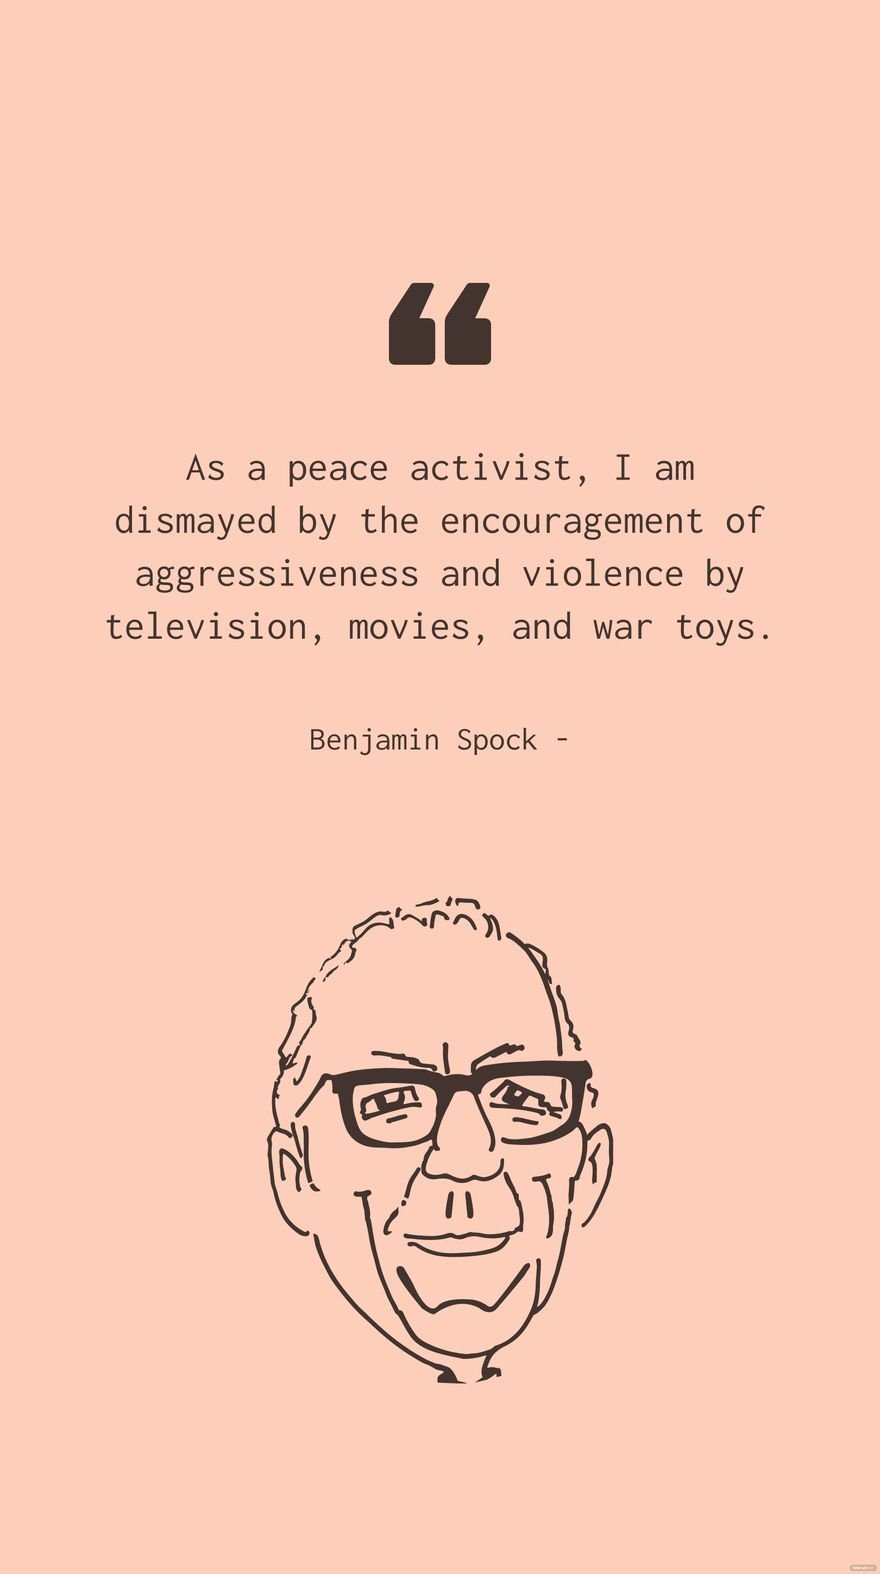 Benjamin Spock - As a peace activist, I am dismayed by the encouragement of aggressiveness and violence by television, movies, and war toys. in JPG